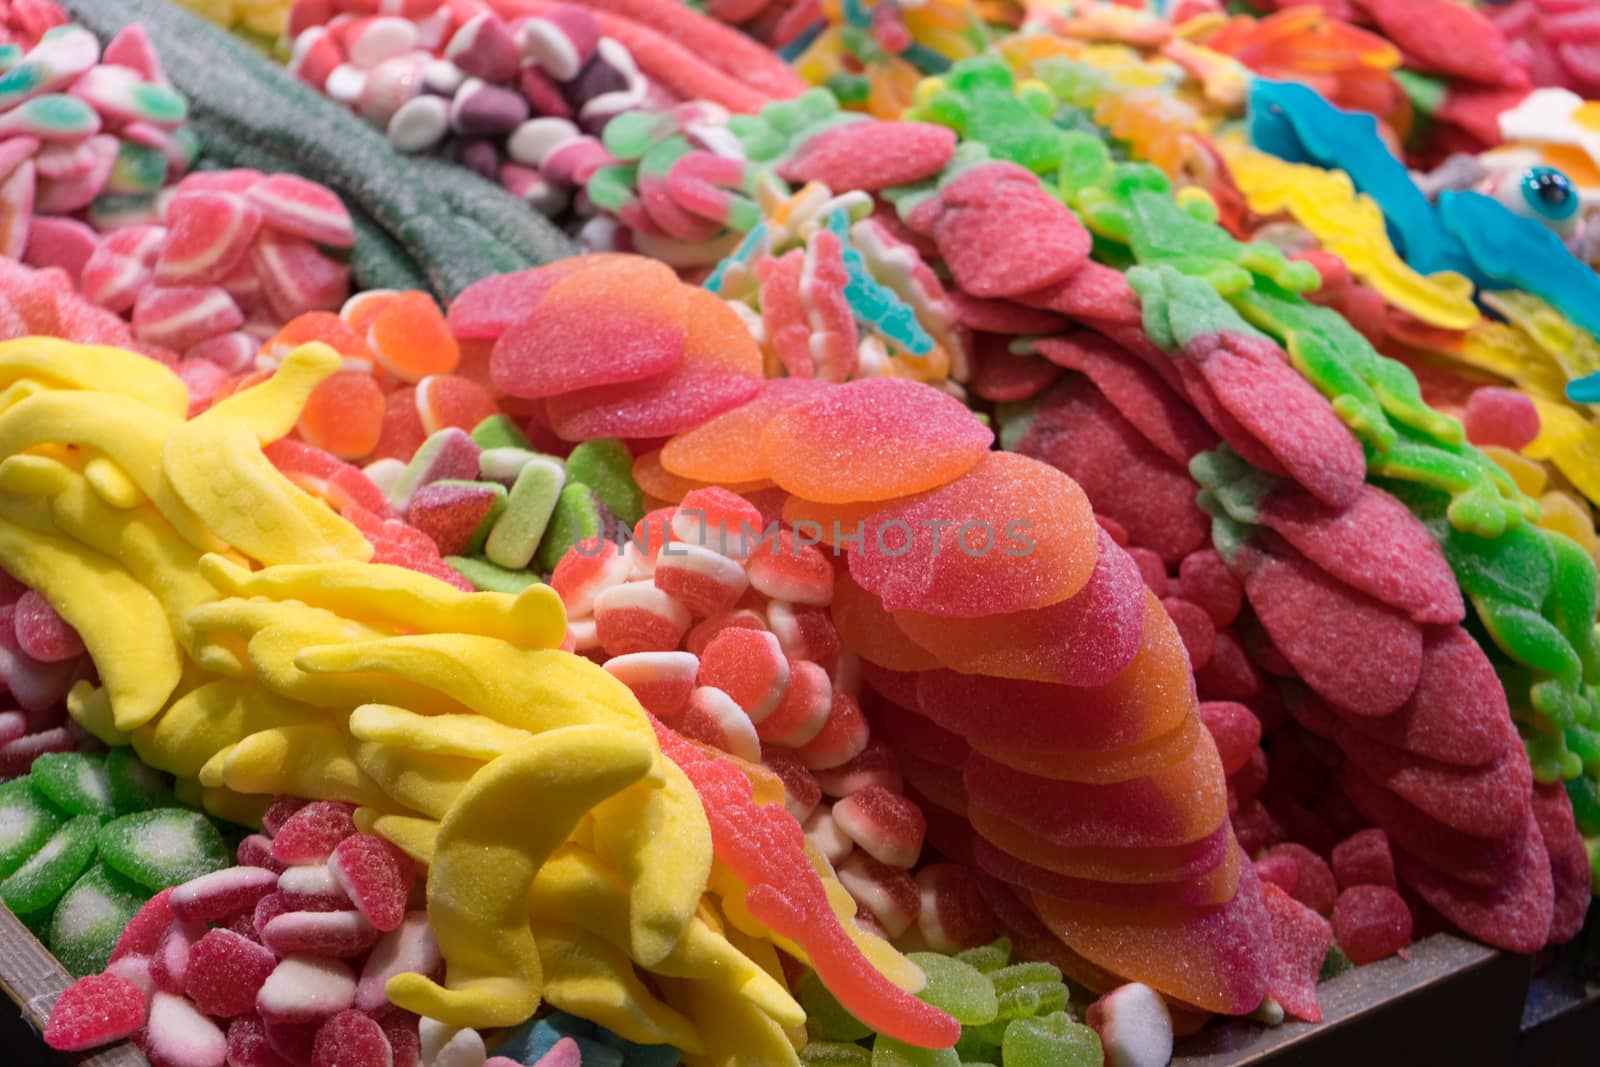 Selection of colourful candy on display at a stall in the mercado de la Boqueria, Barcelona, Spain